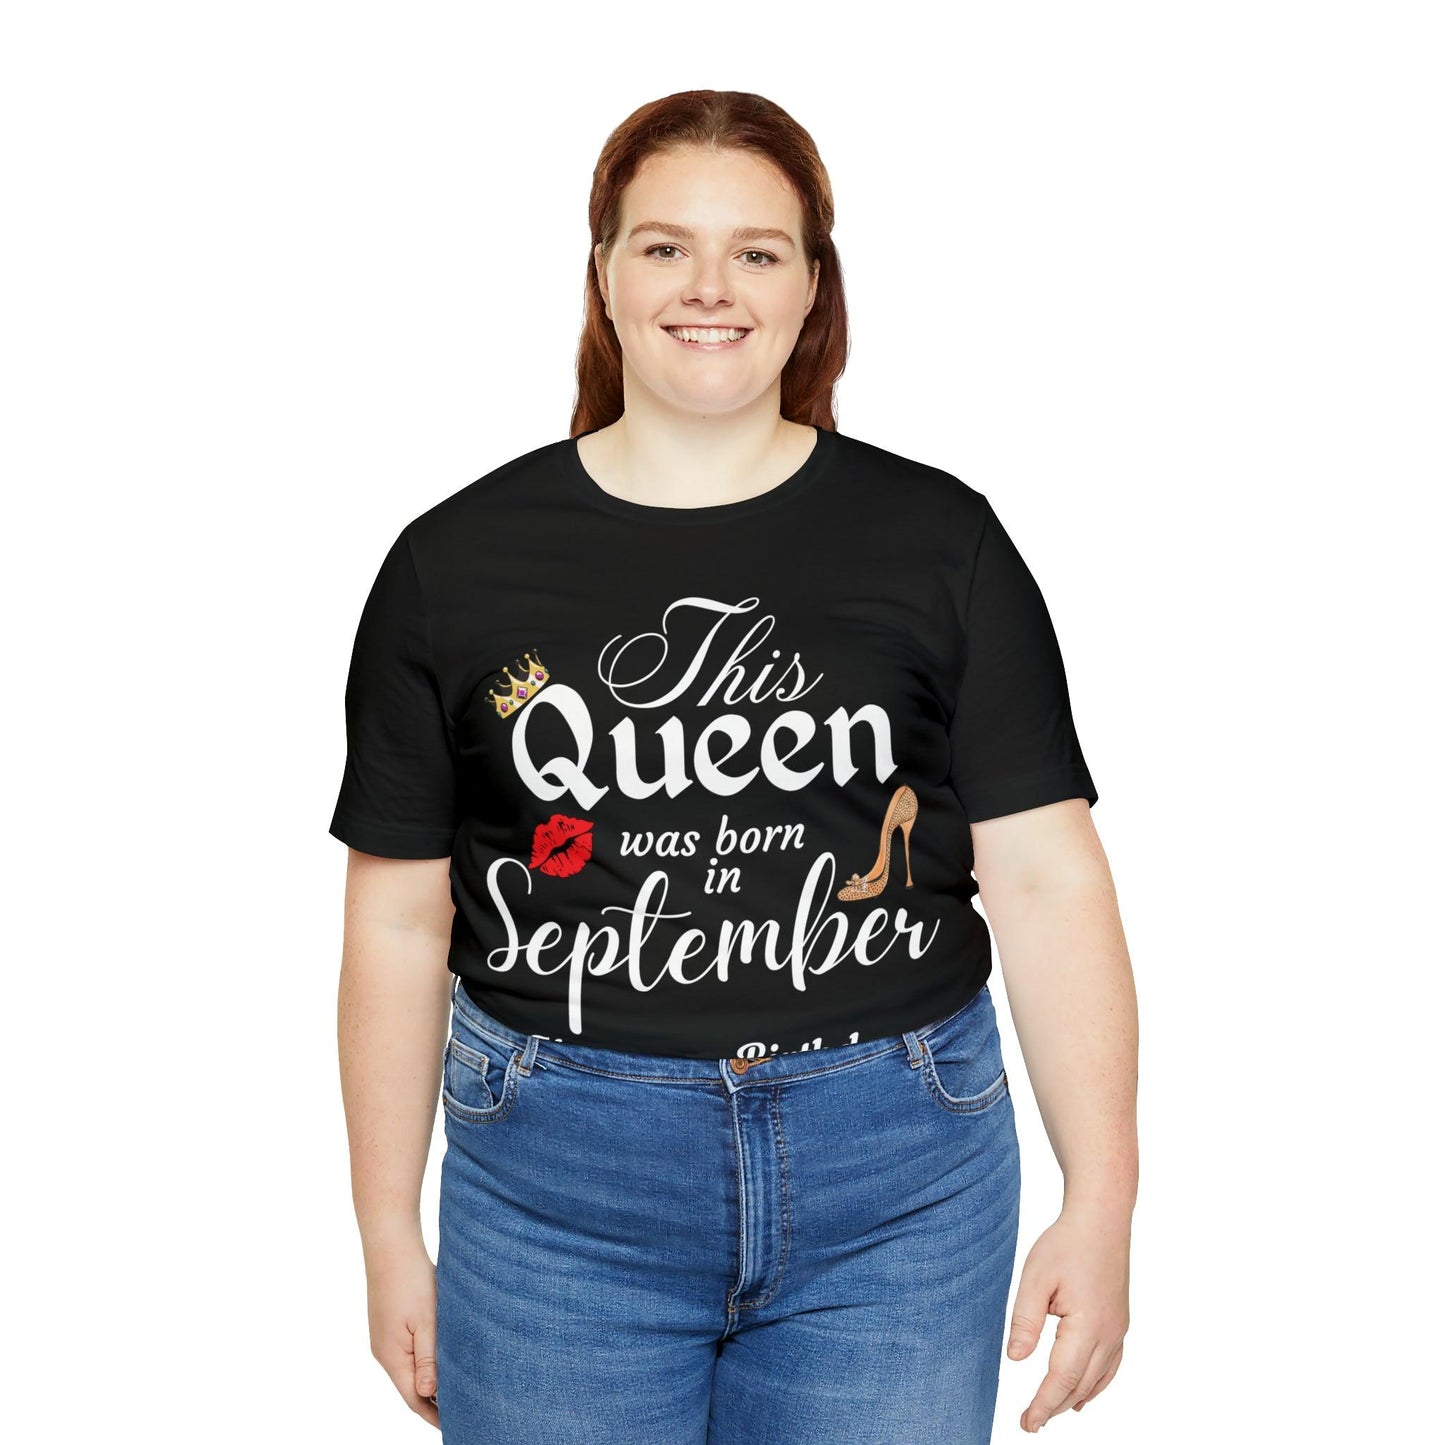 Birthday Queen Shirt, Gift for Birthday, This Queen was born in September Shirt, Funny Queen Shirt, Funny Birthday Shirt, Birthday Gift